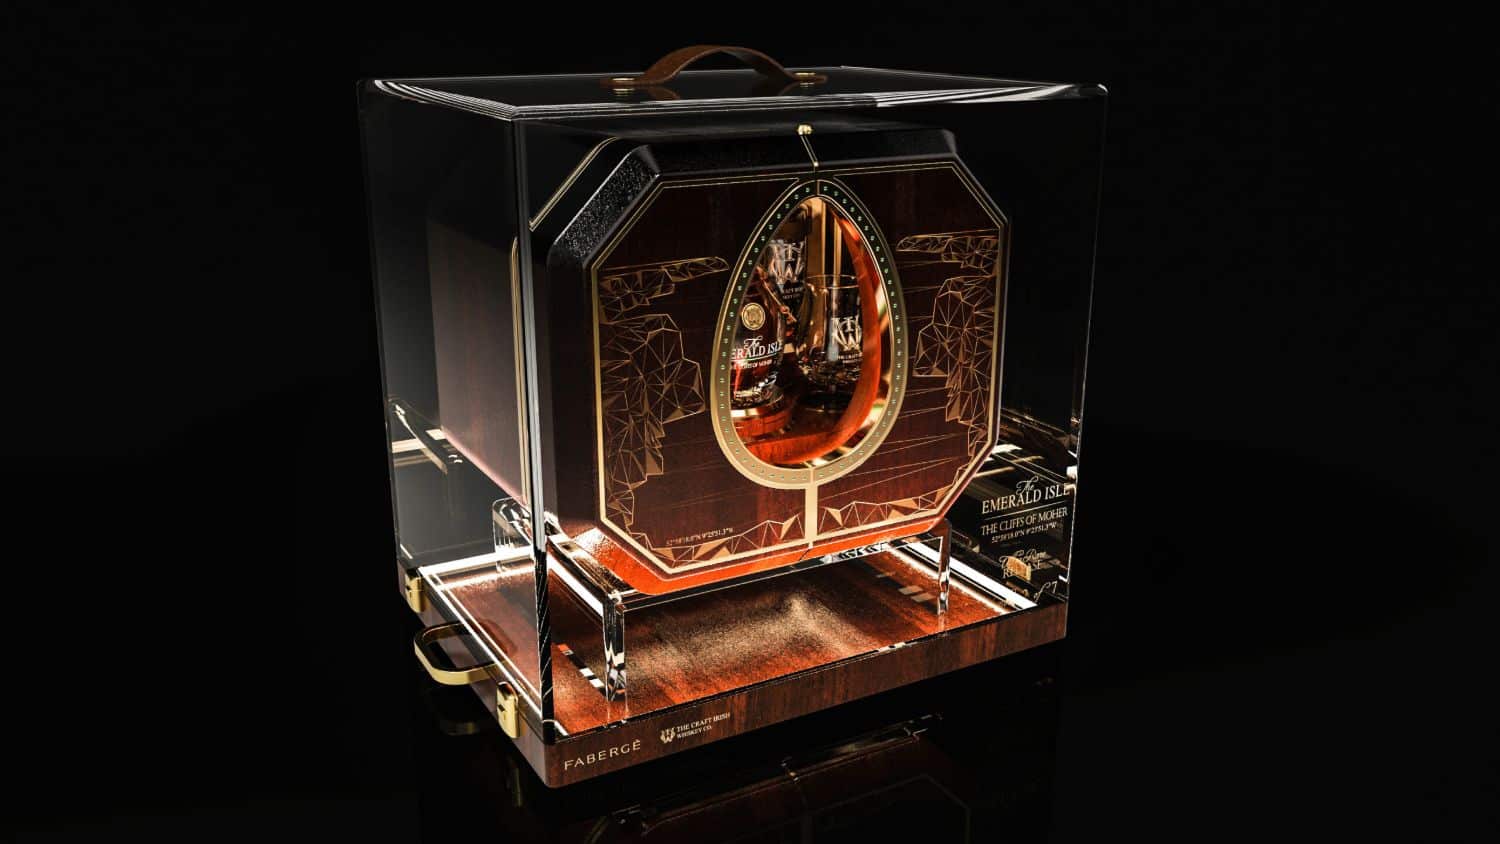 A collector set of the most expensive whiskey ever sold at auction